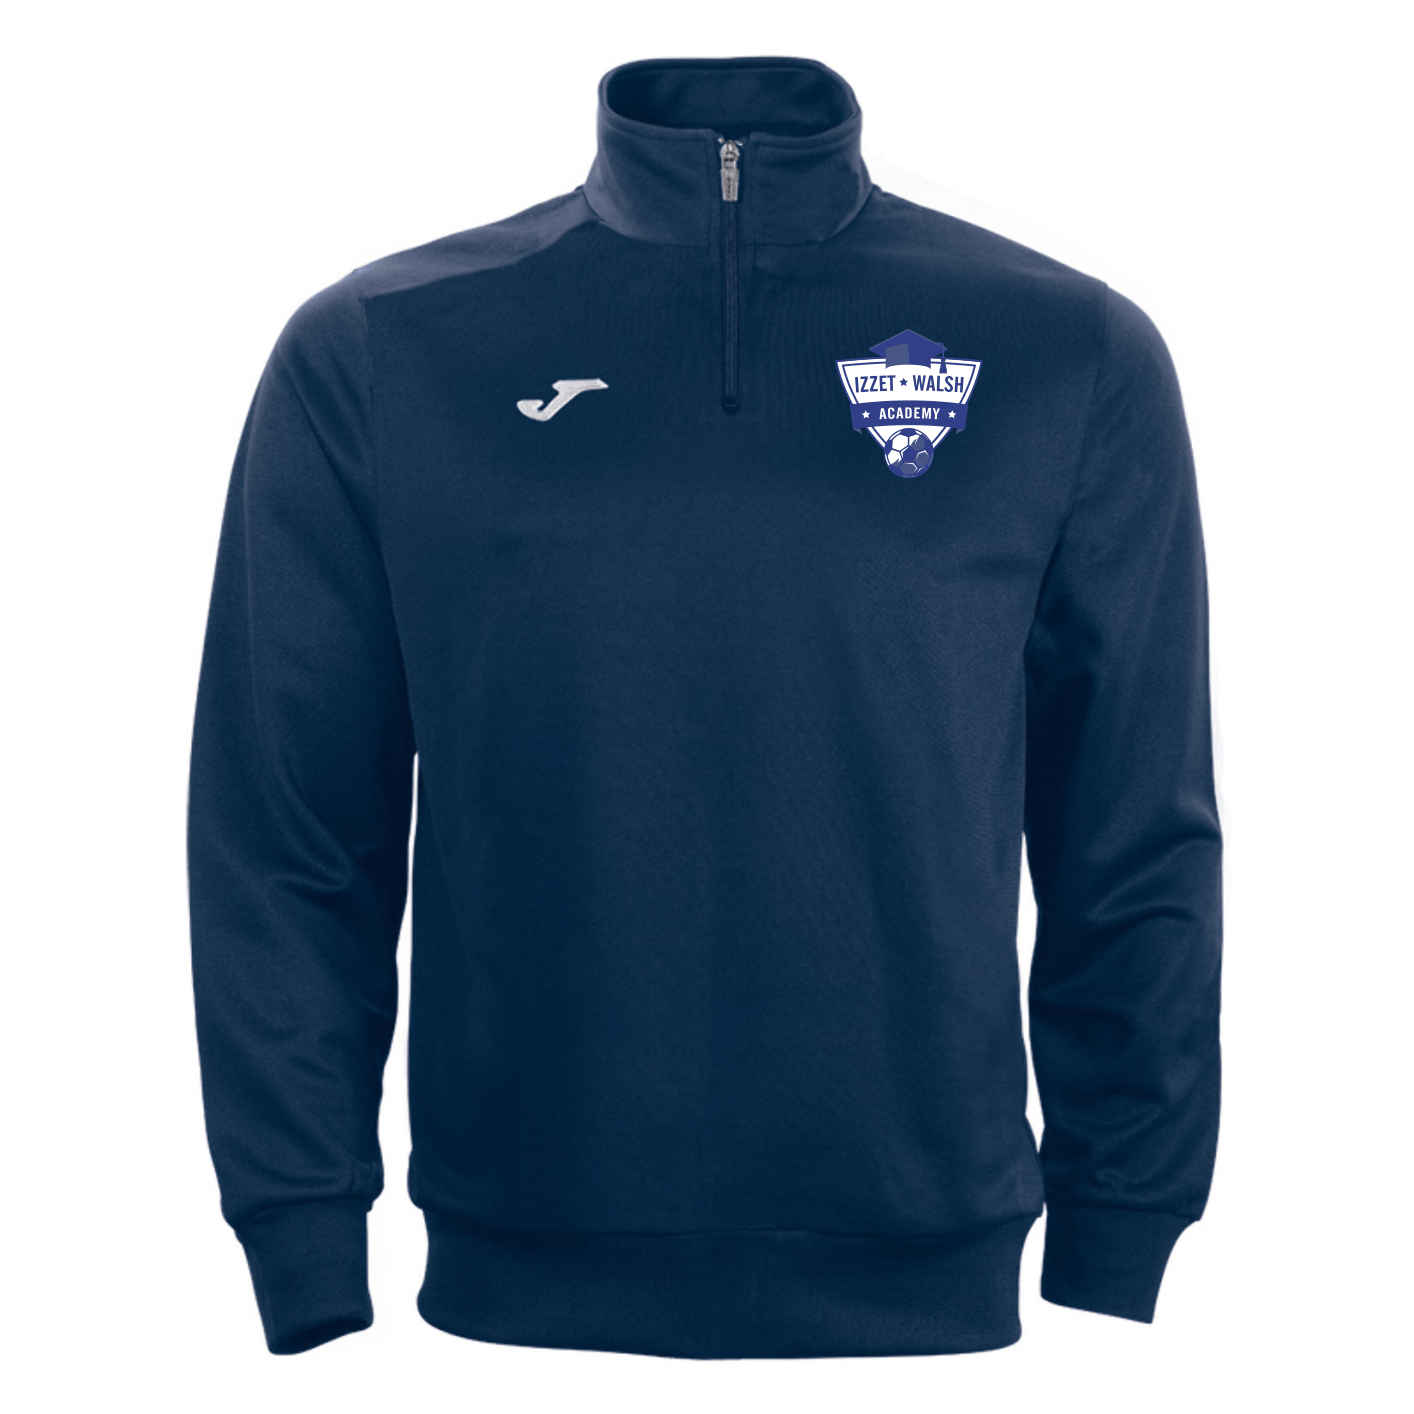 AFDA - Joma collection 2024/25  - New student offer - £50 deposit now + £49.99 later for kit to be shipped.